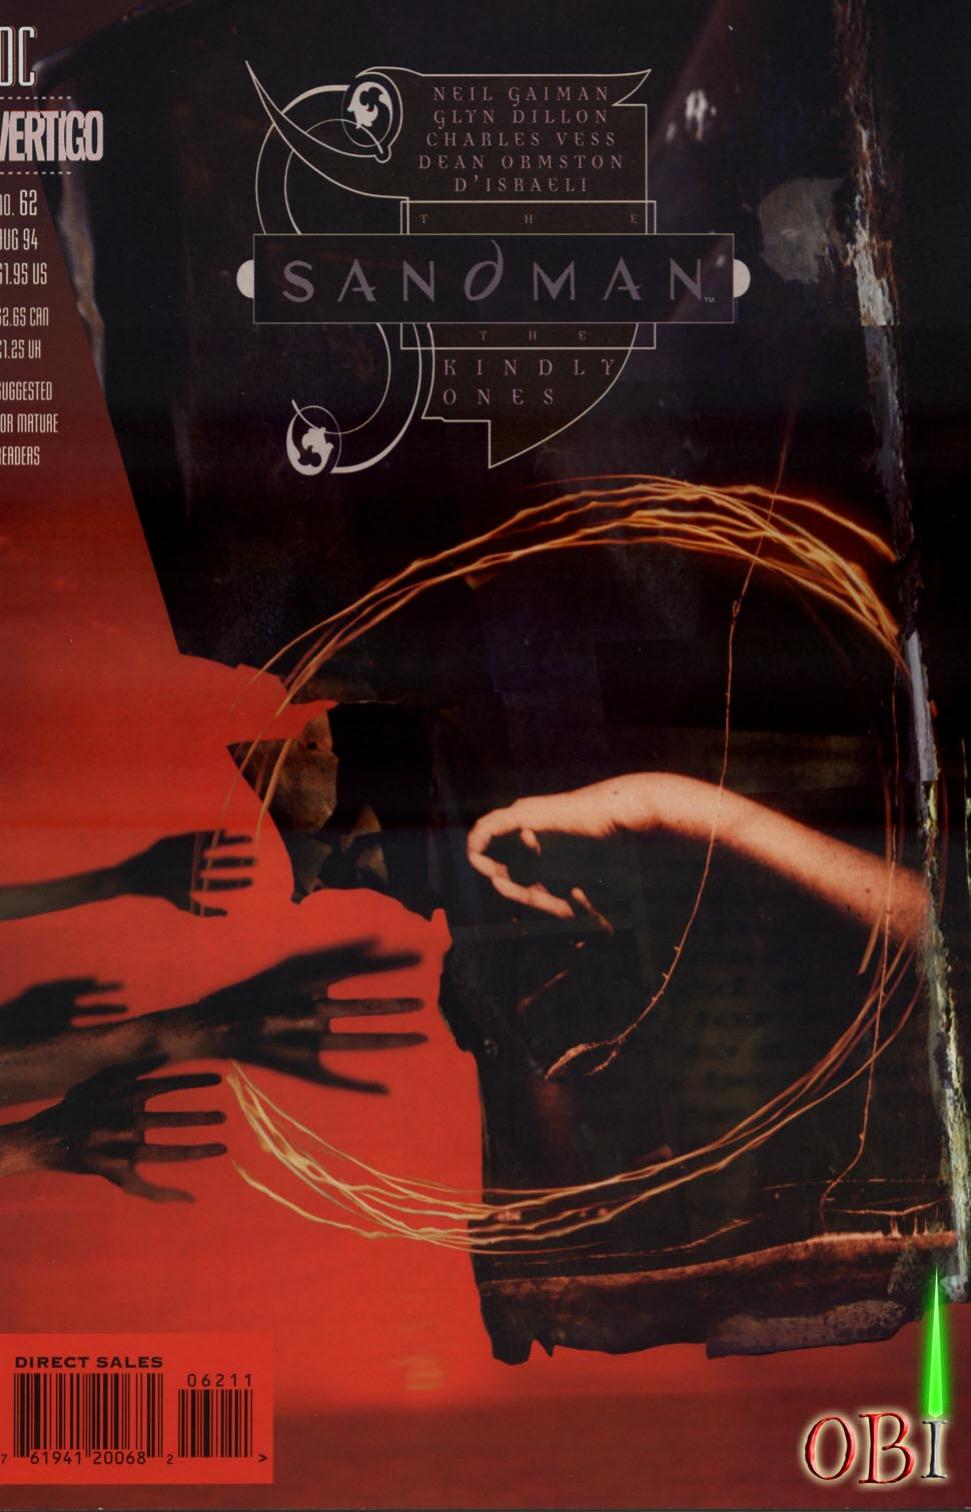 The Sandman #62: The Kindly Ones Part 6 of 13